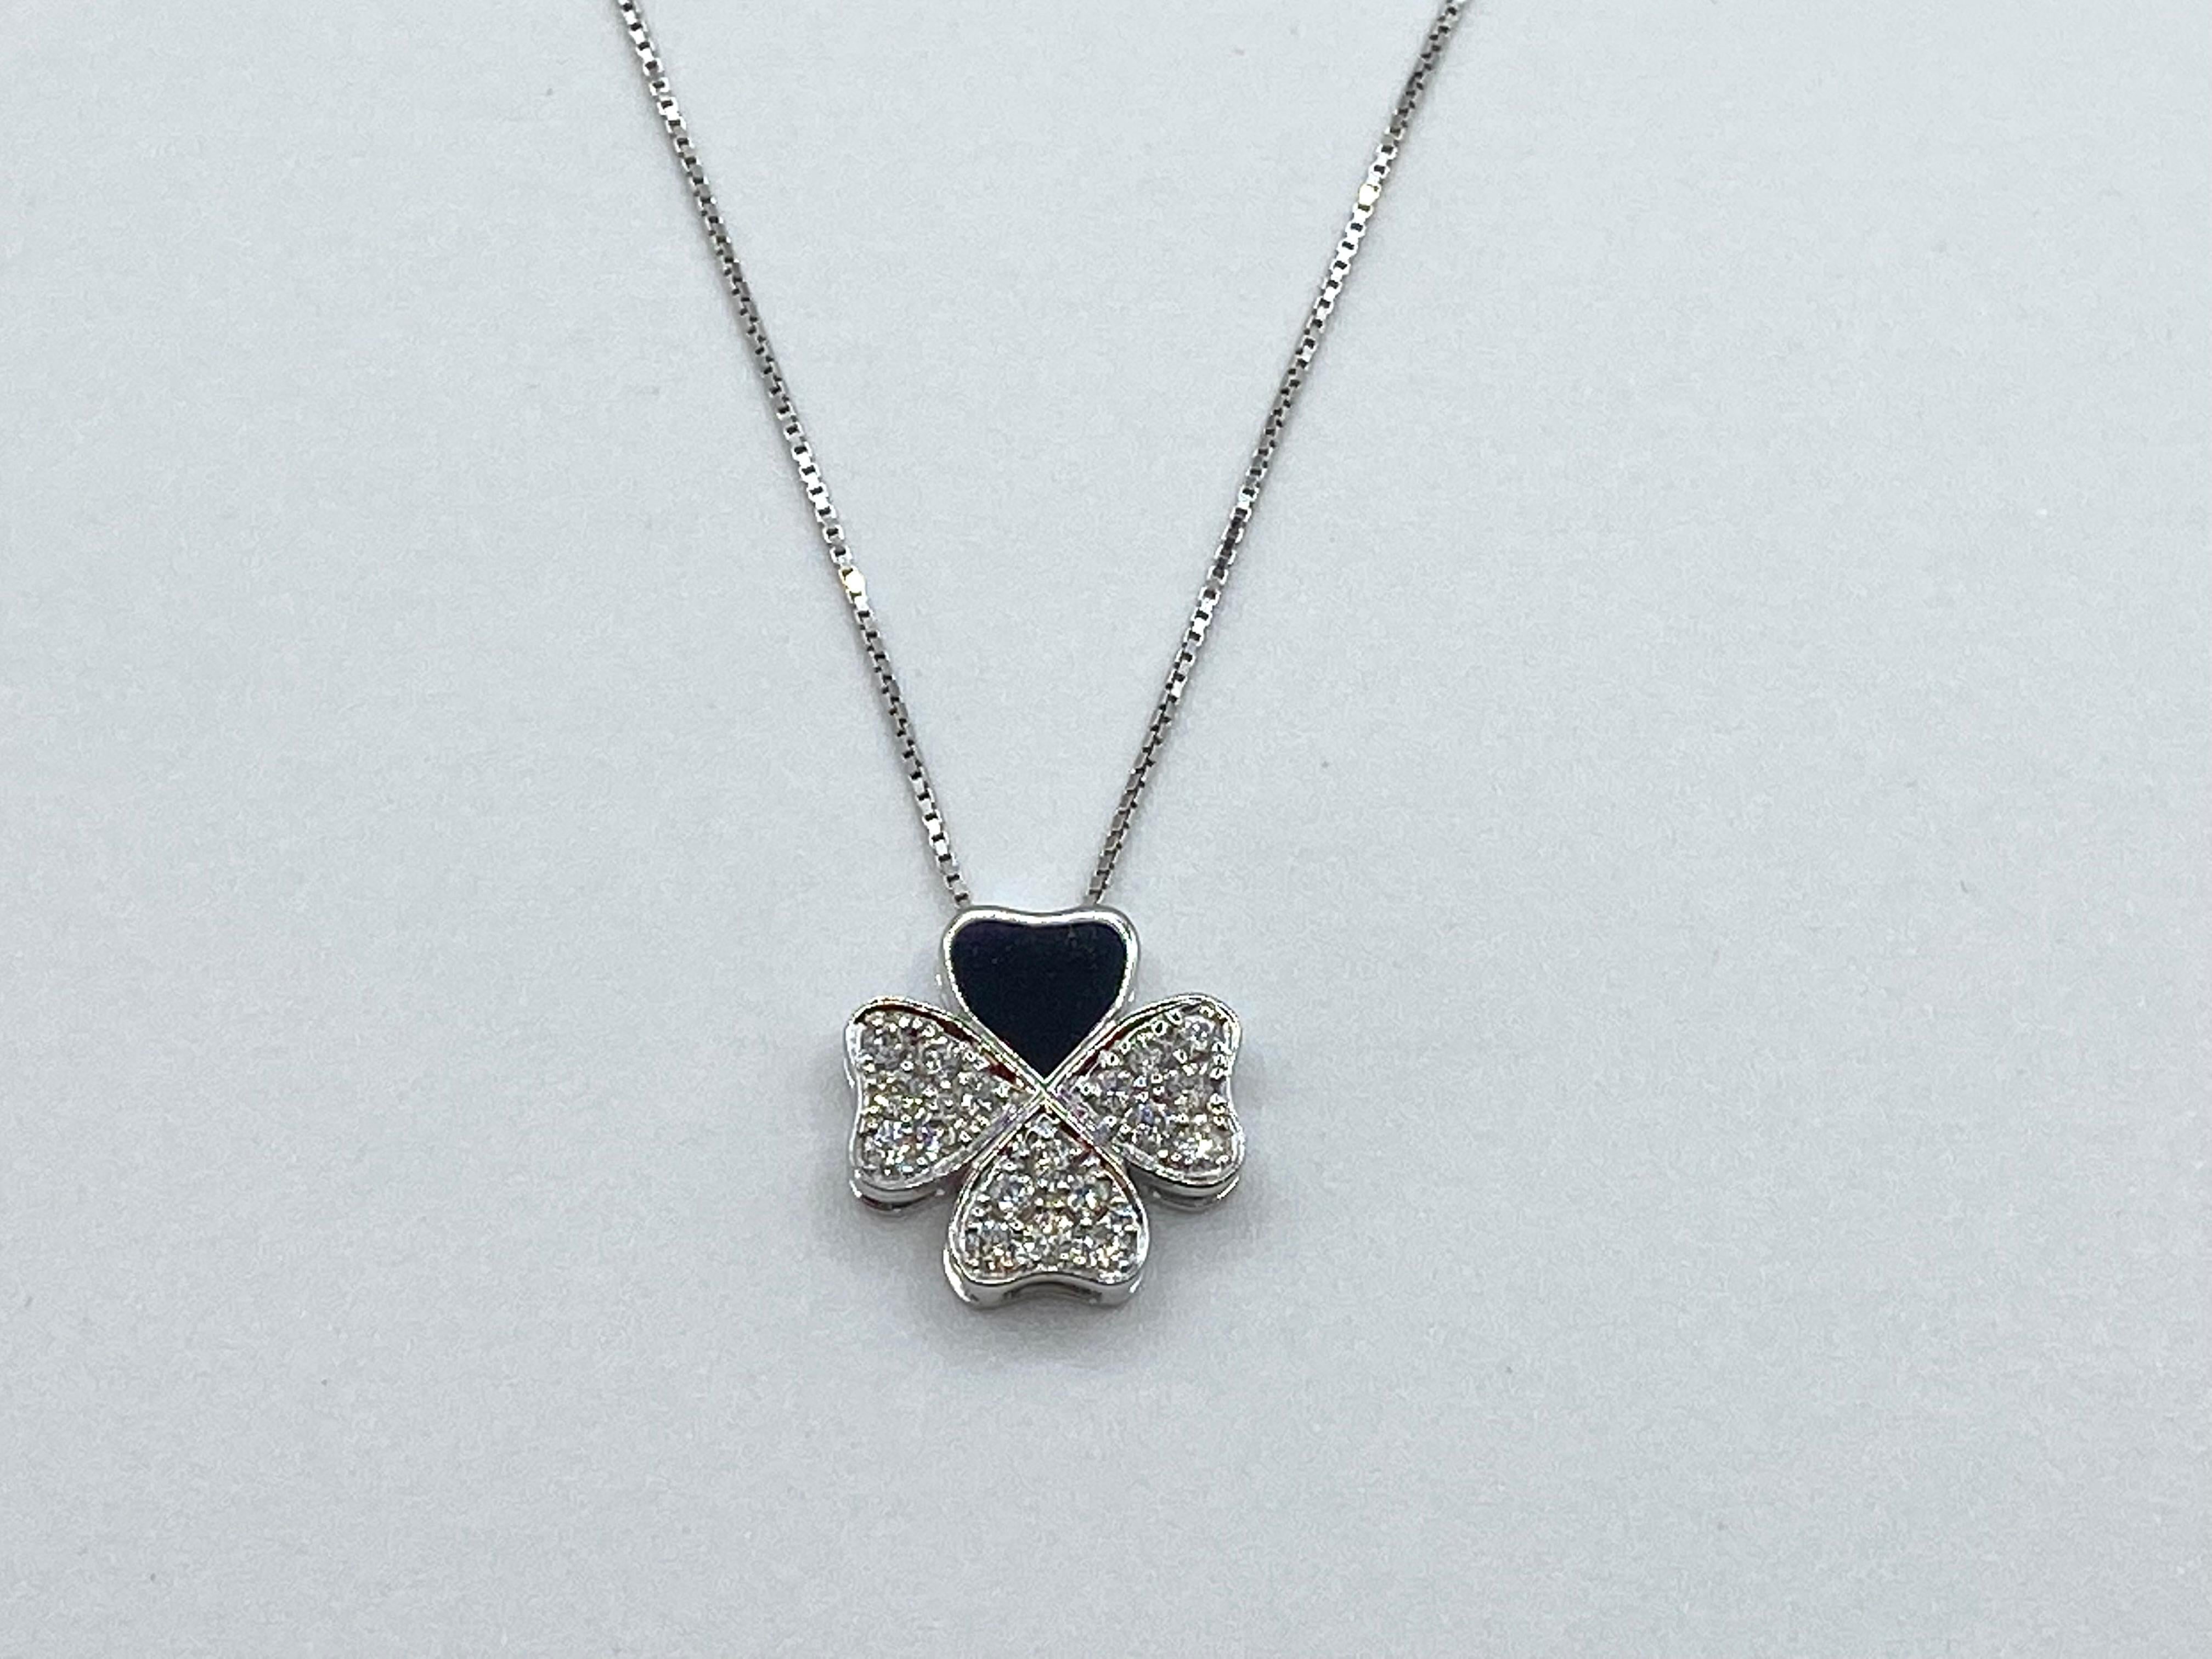 Four Leaf Clover and Necklace in 18 Kt Gold and Brilliant Cut Diamonds
Fortunate! Necklace 50 cm long, 18 Kt white gold and pendant, also 18 kt white gold, set with brilliant cut G color diamonds, vs 1, 0.29 carats; Total weight 3.6 grams. The